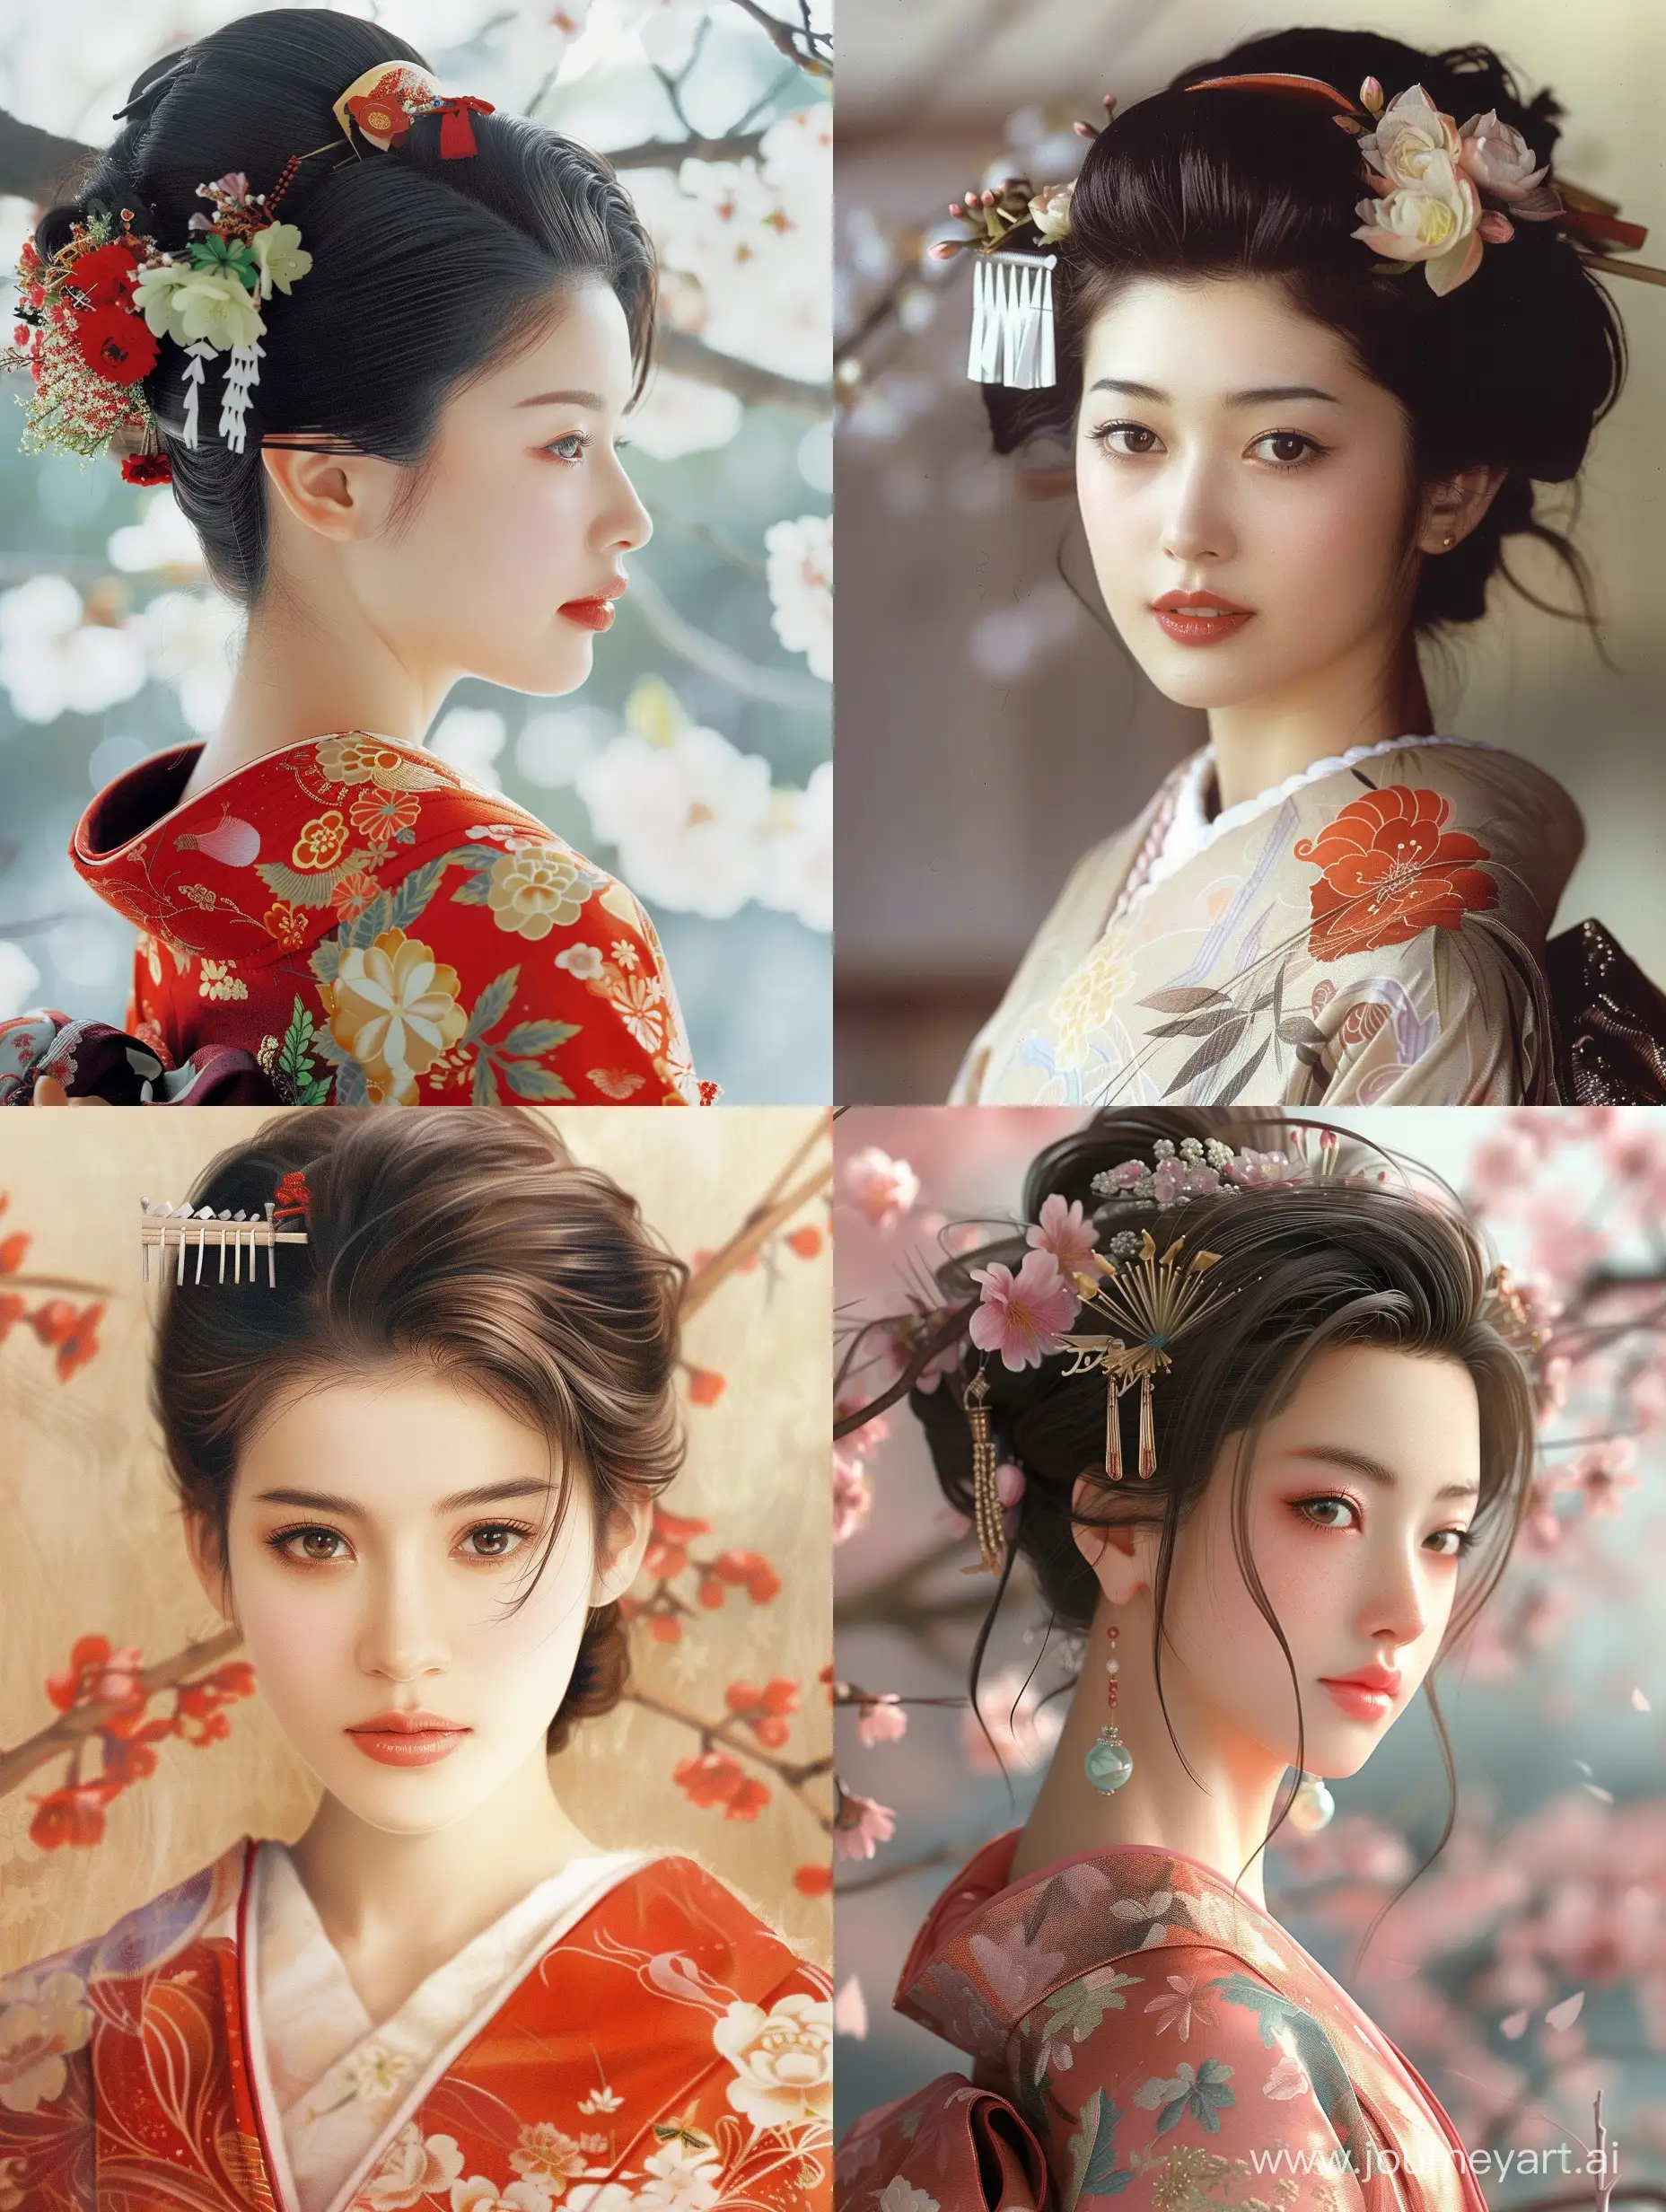 Elegant-Japanese-Woman-in-Traditional-Attire-Captivating-Beauty